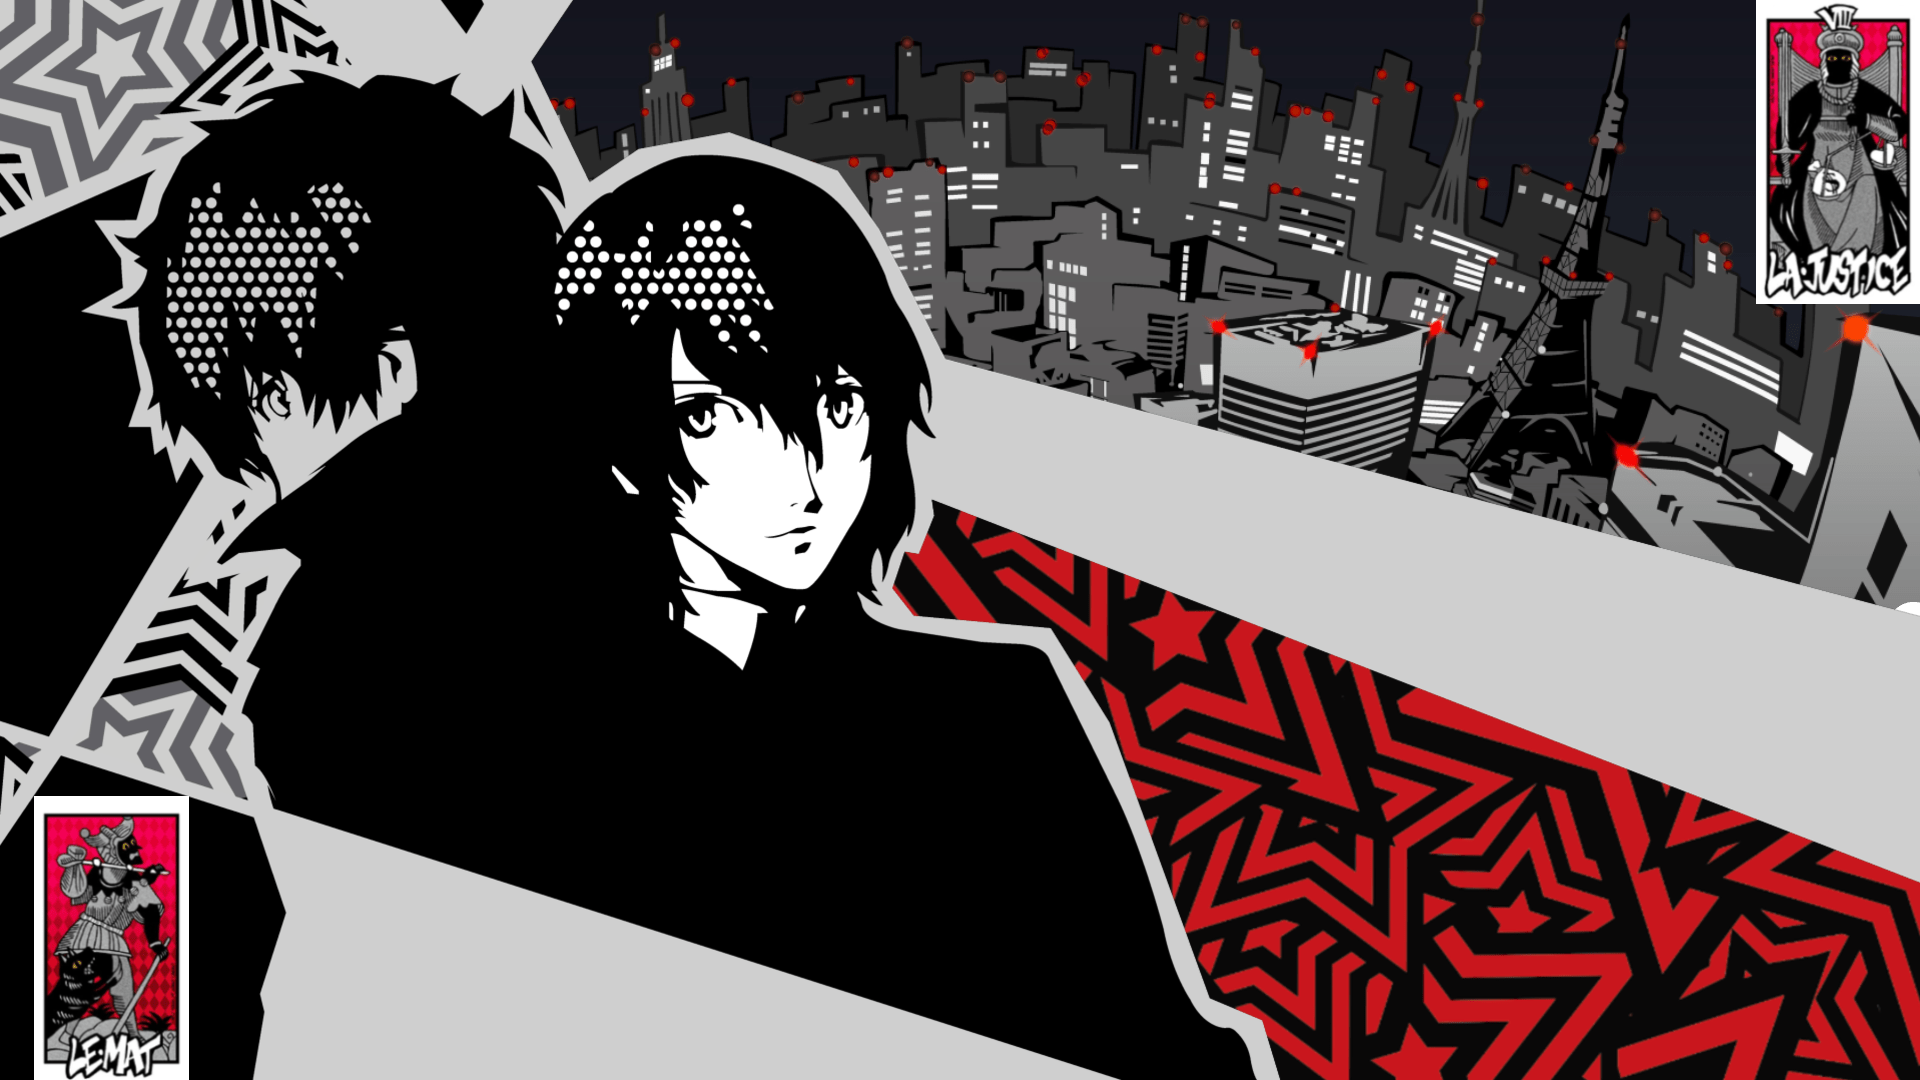 Akechi Persona 5 Wallpapers Top Free Akechi Persona 5 Backgrounds Wallpaperaccess